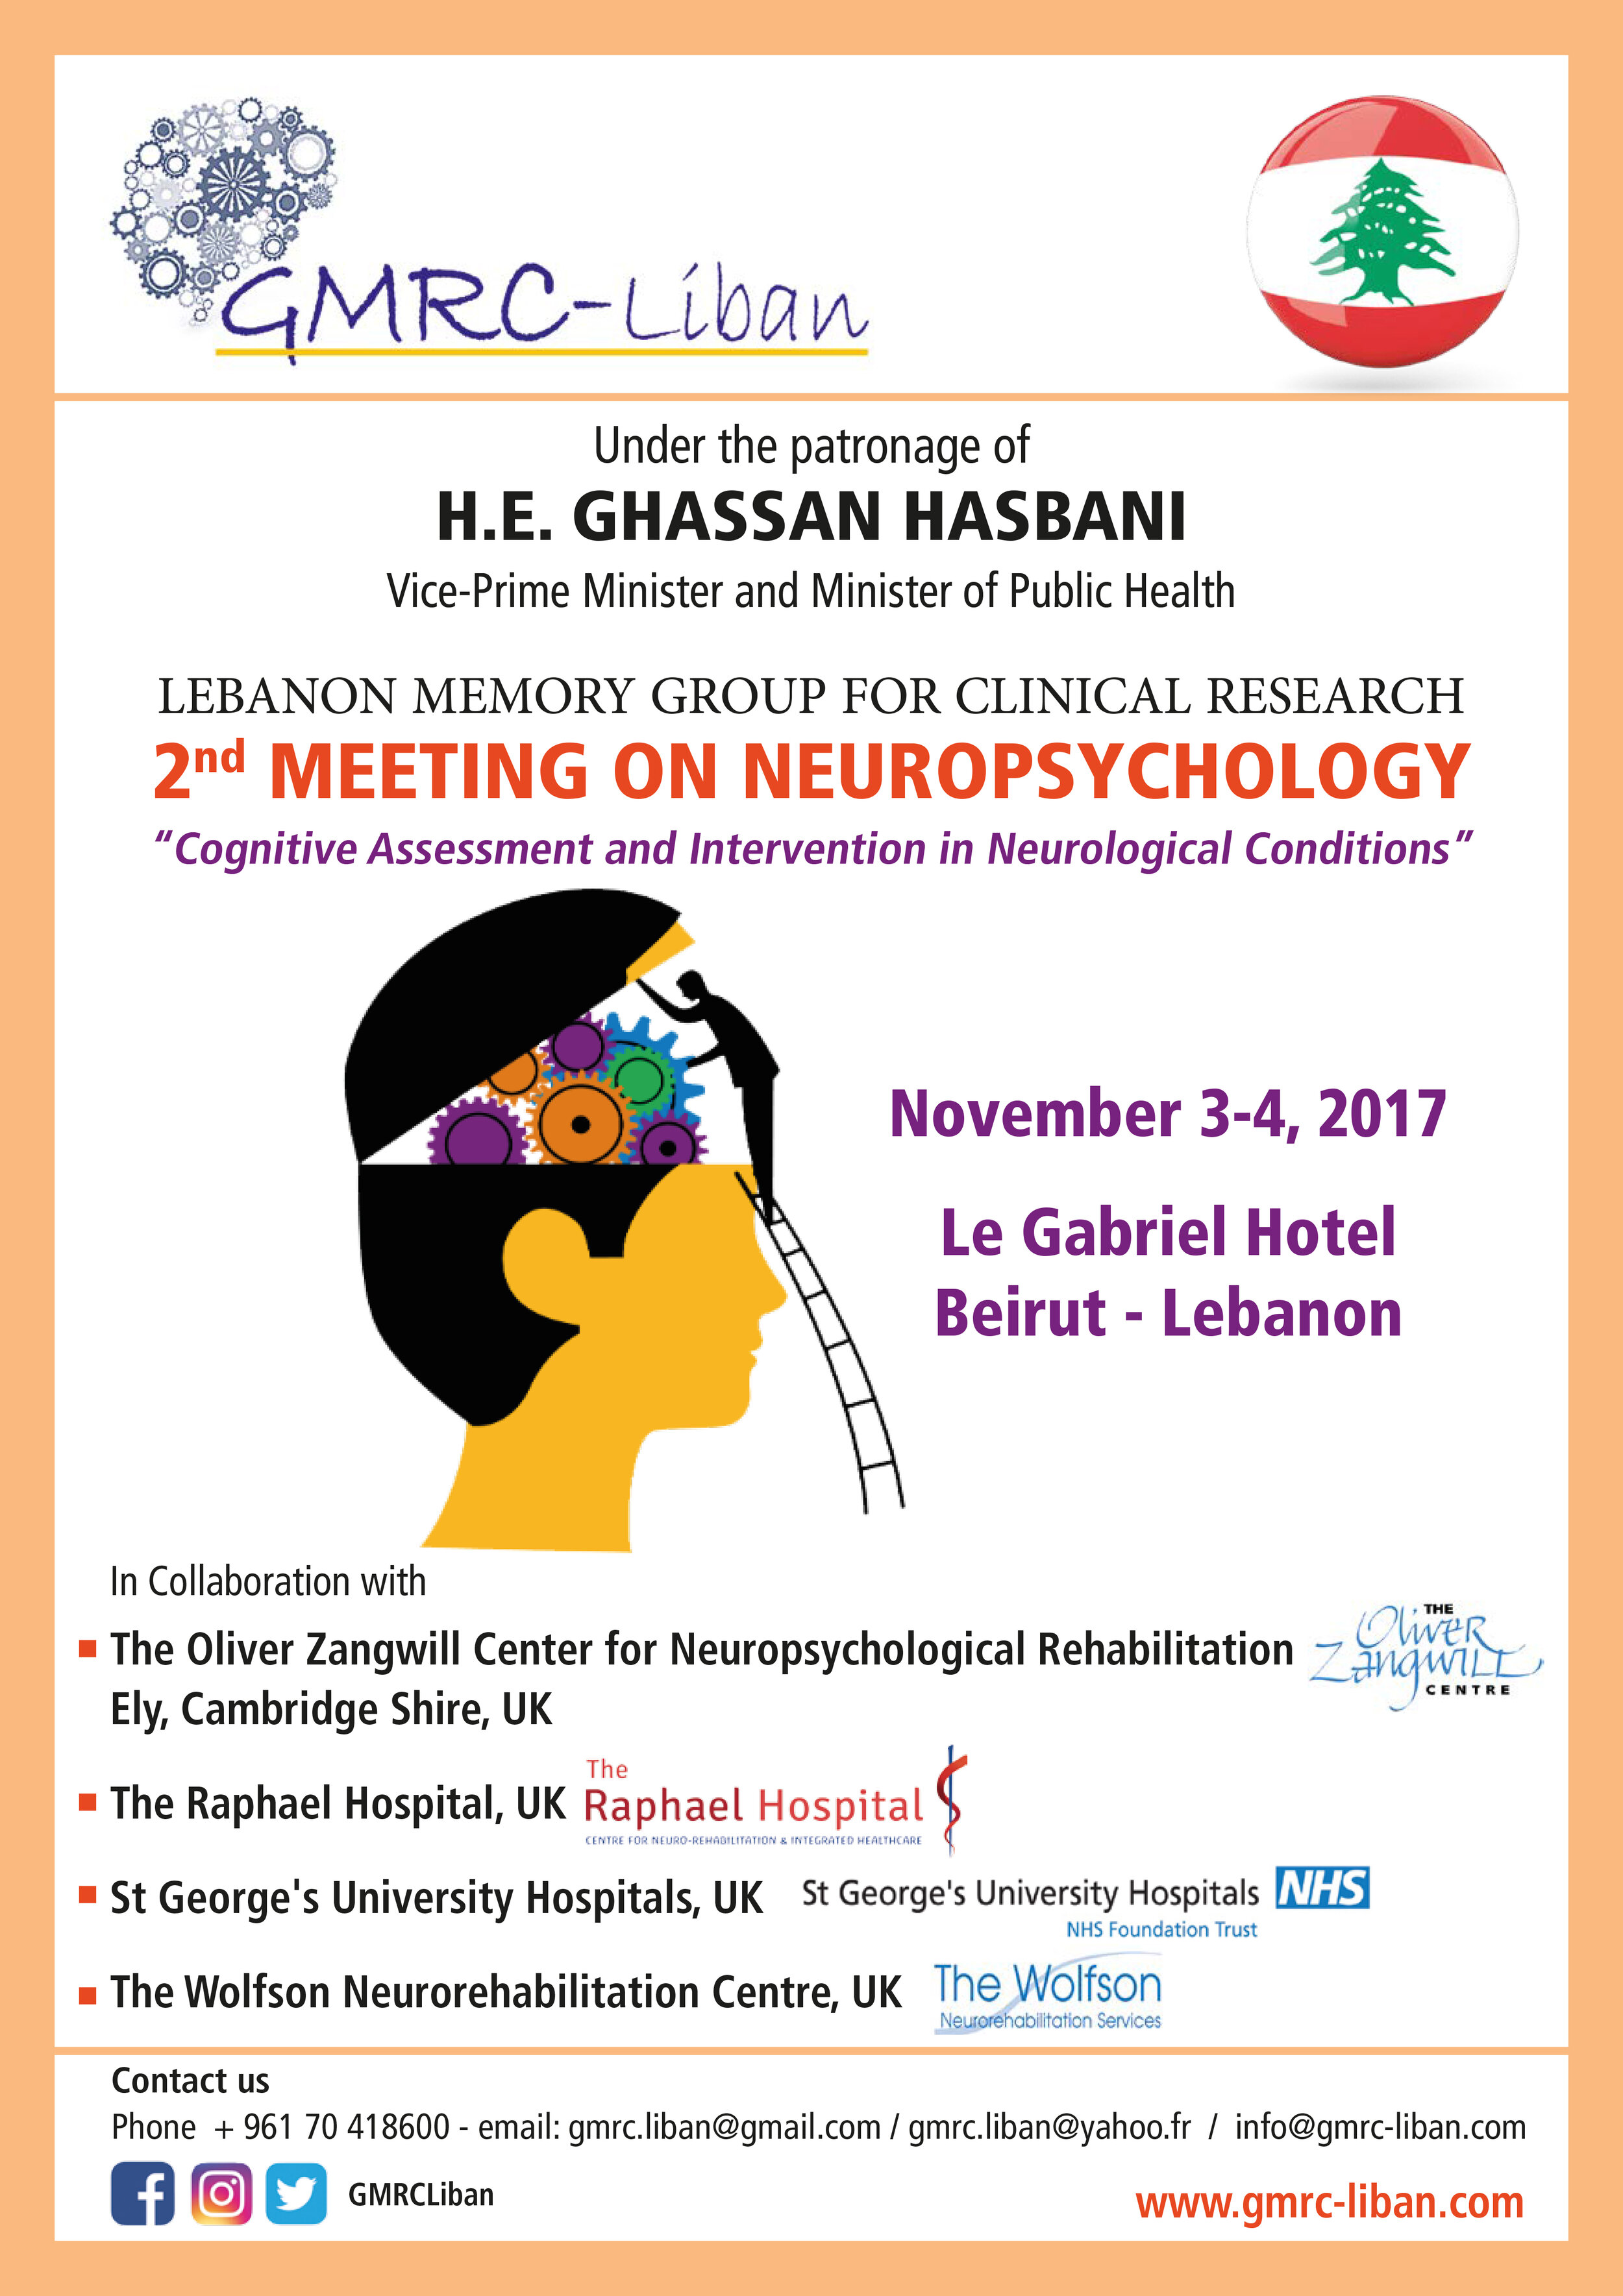 2nd Meeting - “COGNITIVE ASSESSMENT AND INTERVENTION IN NEUROLOGICAL CONDITIONS”